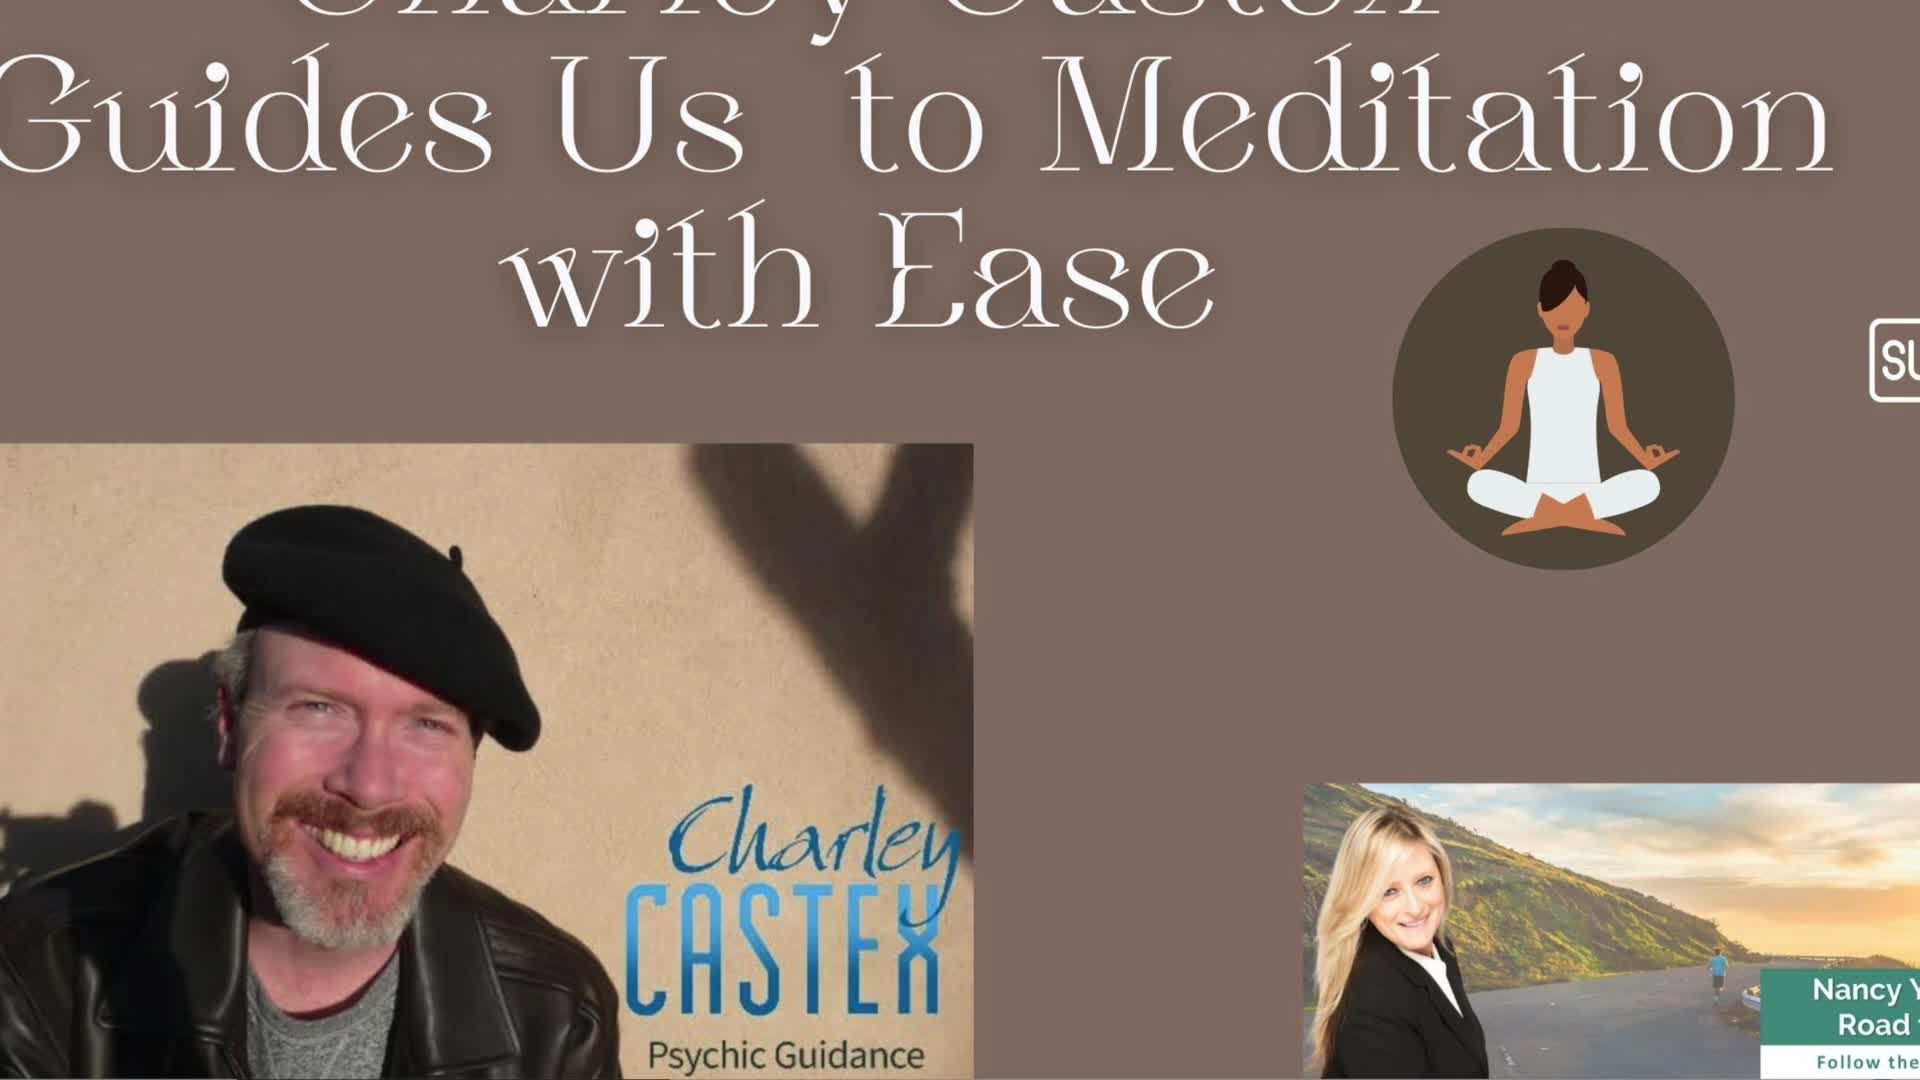 Charlie Castex Tells Us How to Quiet the Mind & Balance